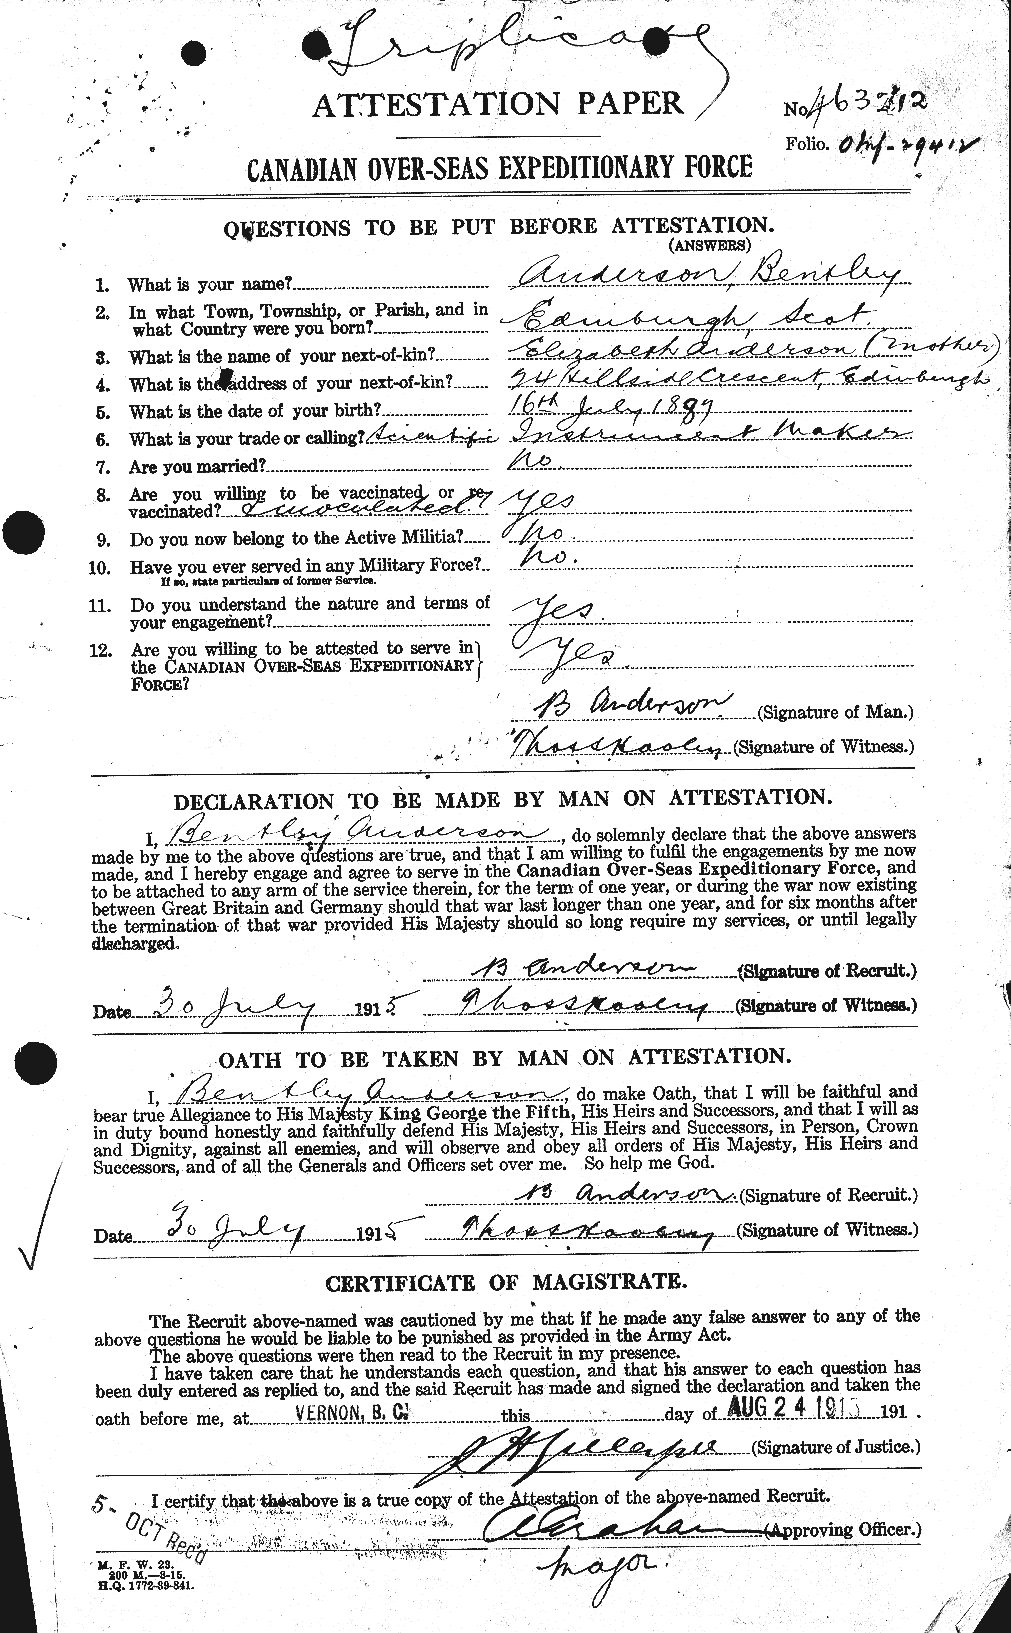 Personnel Records of the First World War - CEF 209319a